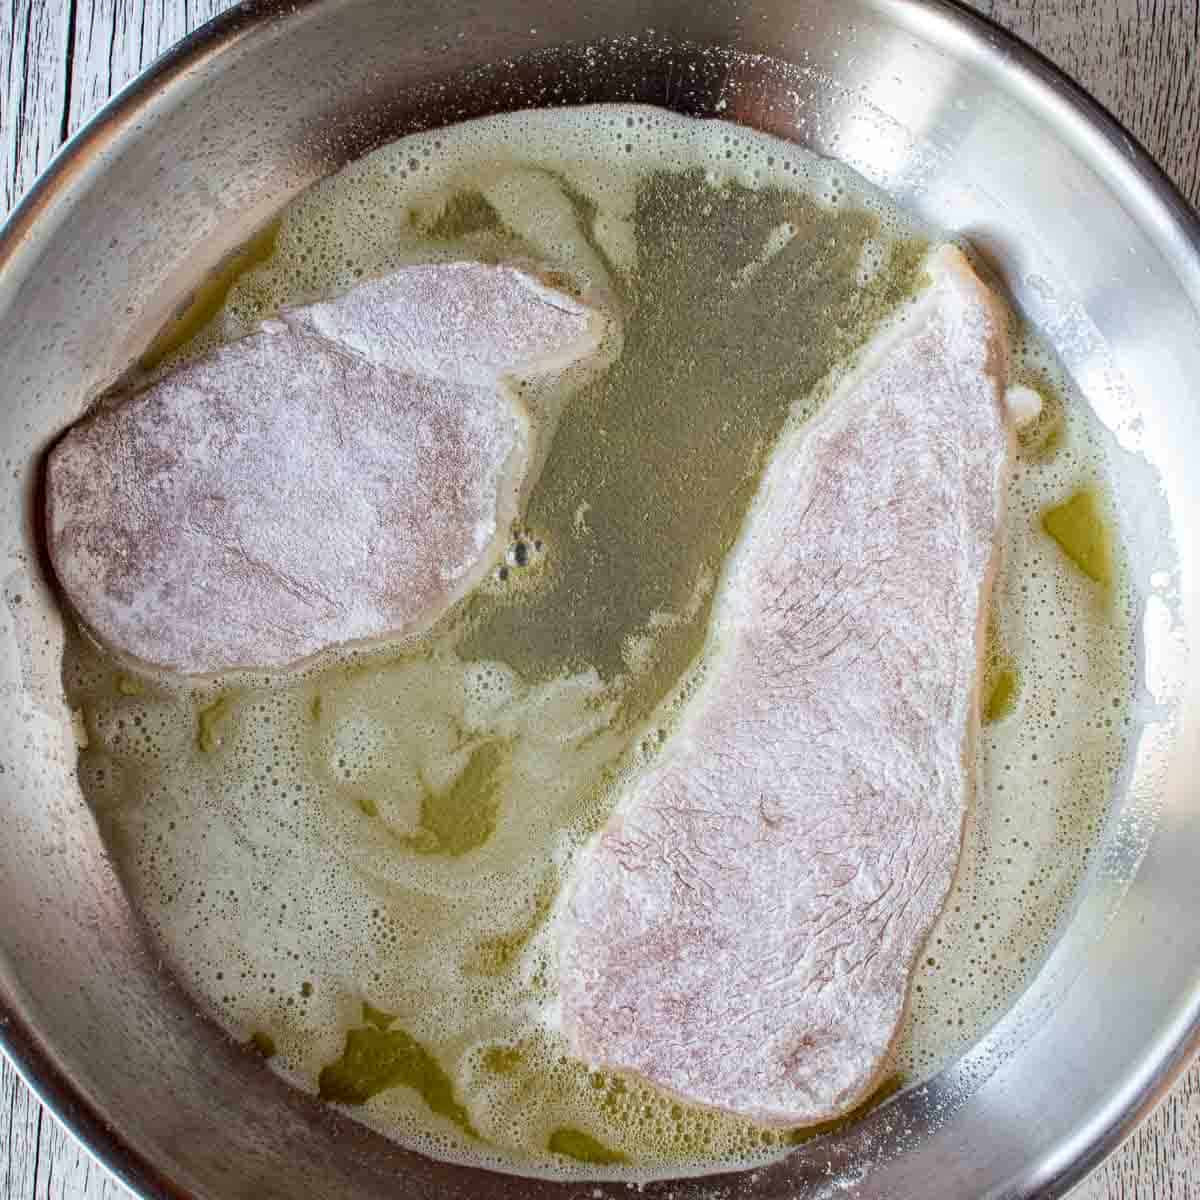 Flour coated chicken cutlets frying in oil in a stainless steel pan.